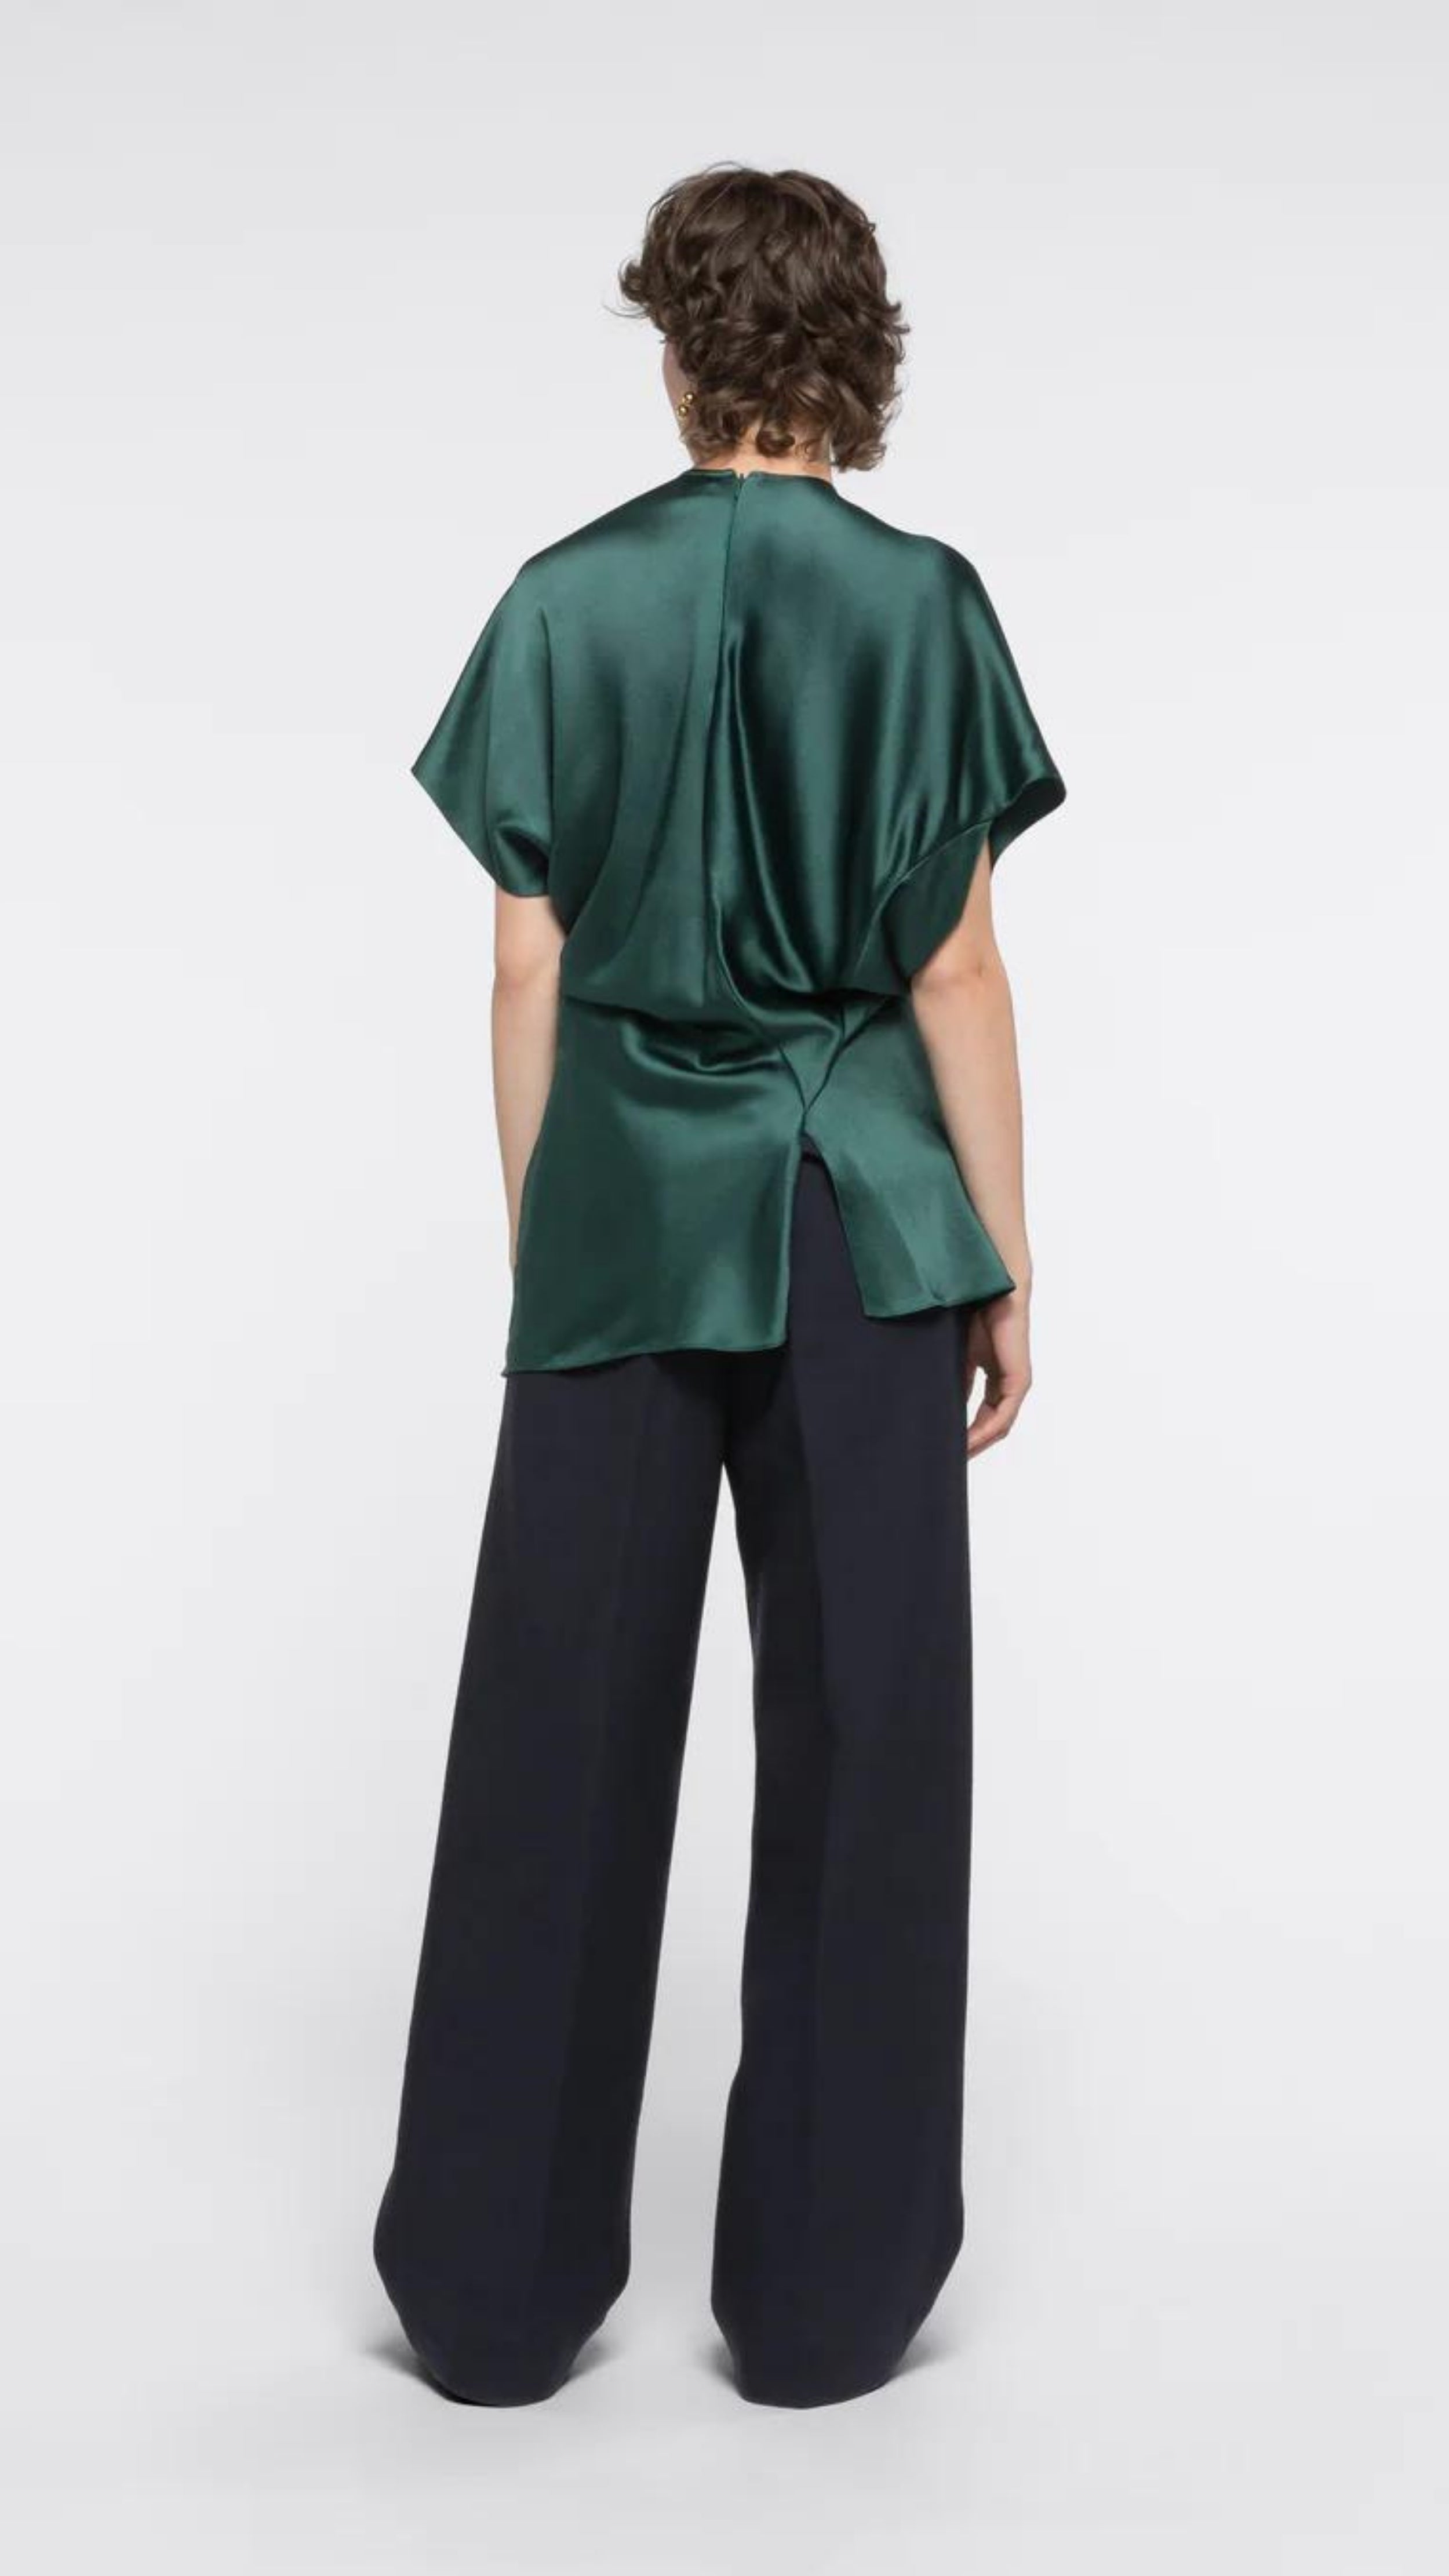 AZ Factory Colville Molly Molloy Lucinda Chambers, Asymmetric Satin Tee Shirt. Elegantly draped in forest green satin material in a classic tee shirt shape. Shown on model facing to the back.